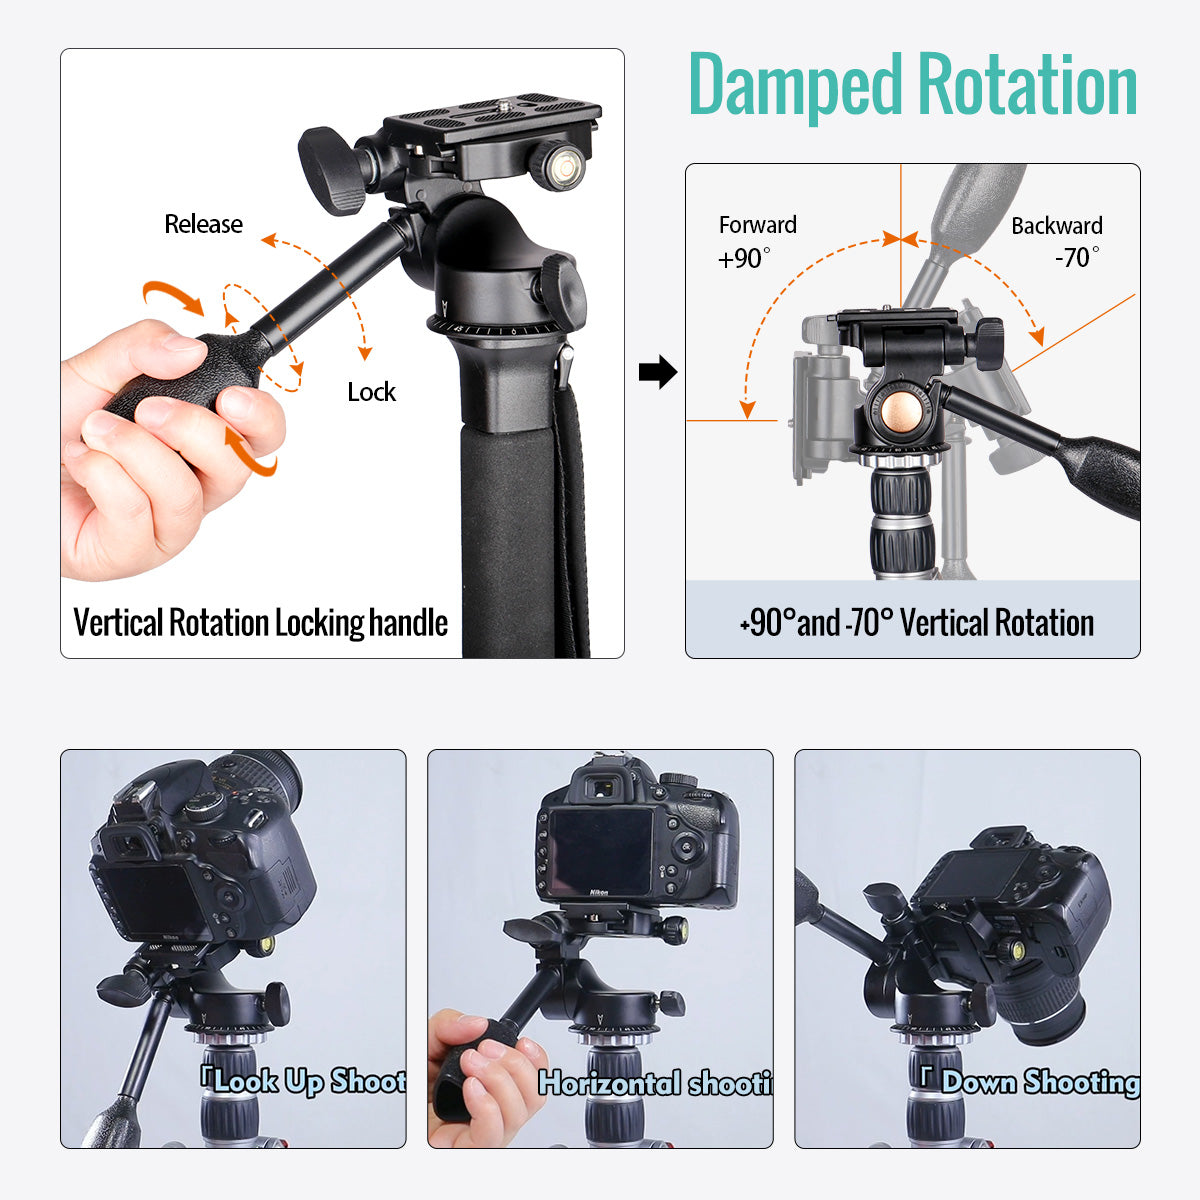 Tripod Pan Head 360°Single Handle Hydraulic Damping Three-Dimensional Head with Quick Release Plate for Tripod, Monopod, DSLR Camera, Camcorder